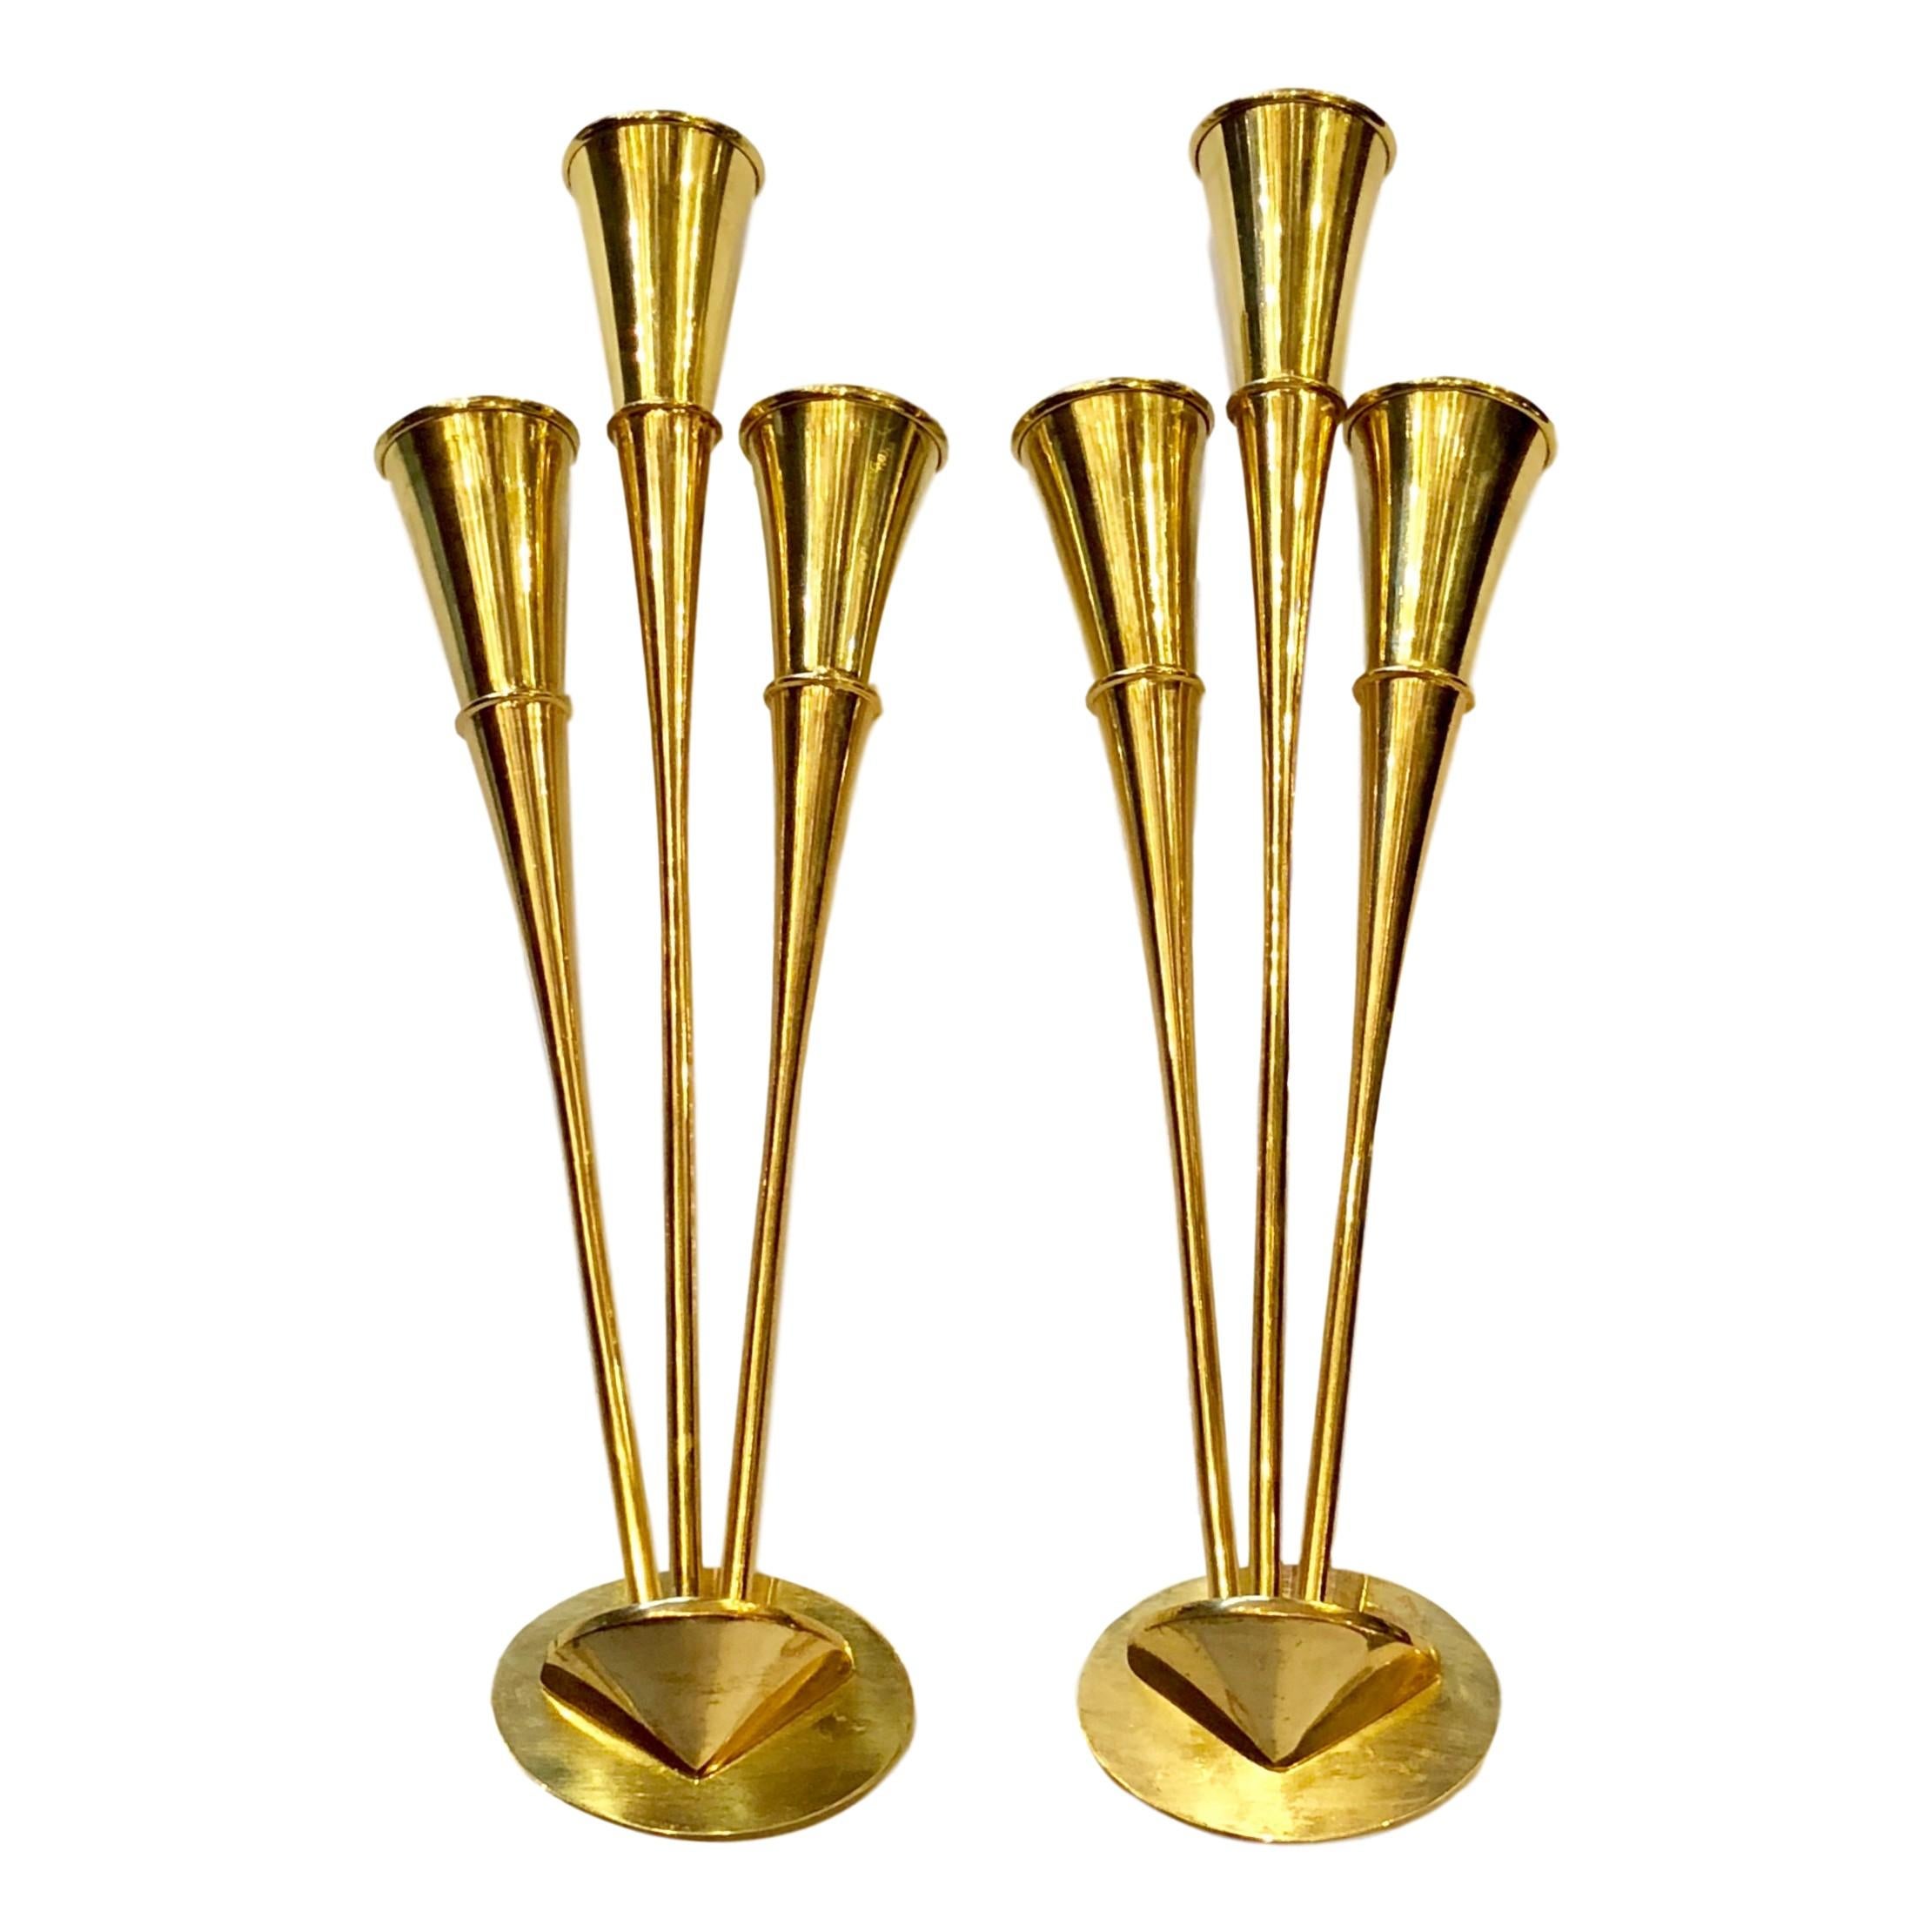 Pair of Moderne Sconces For Sale